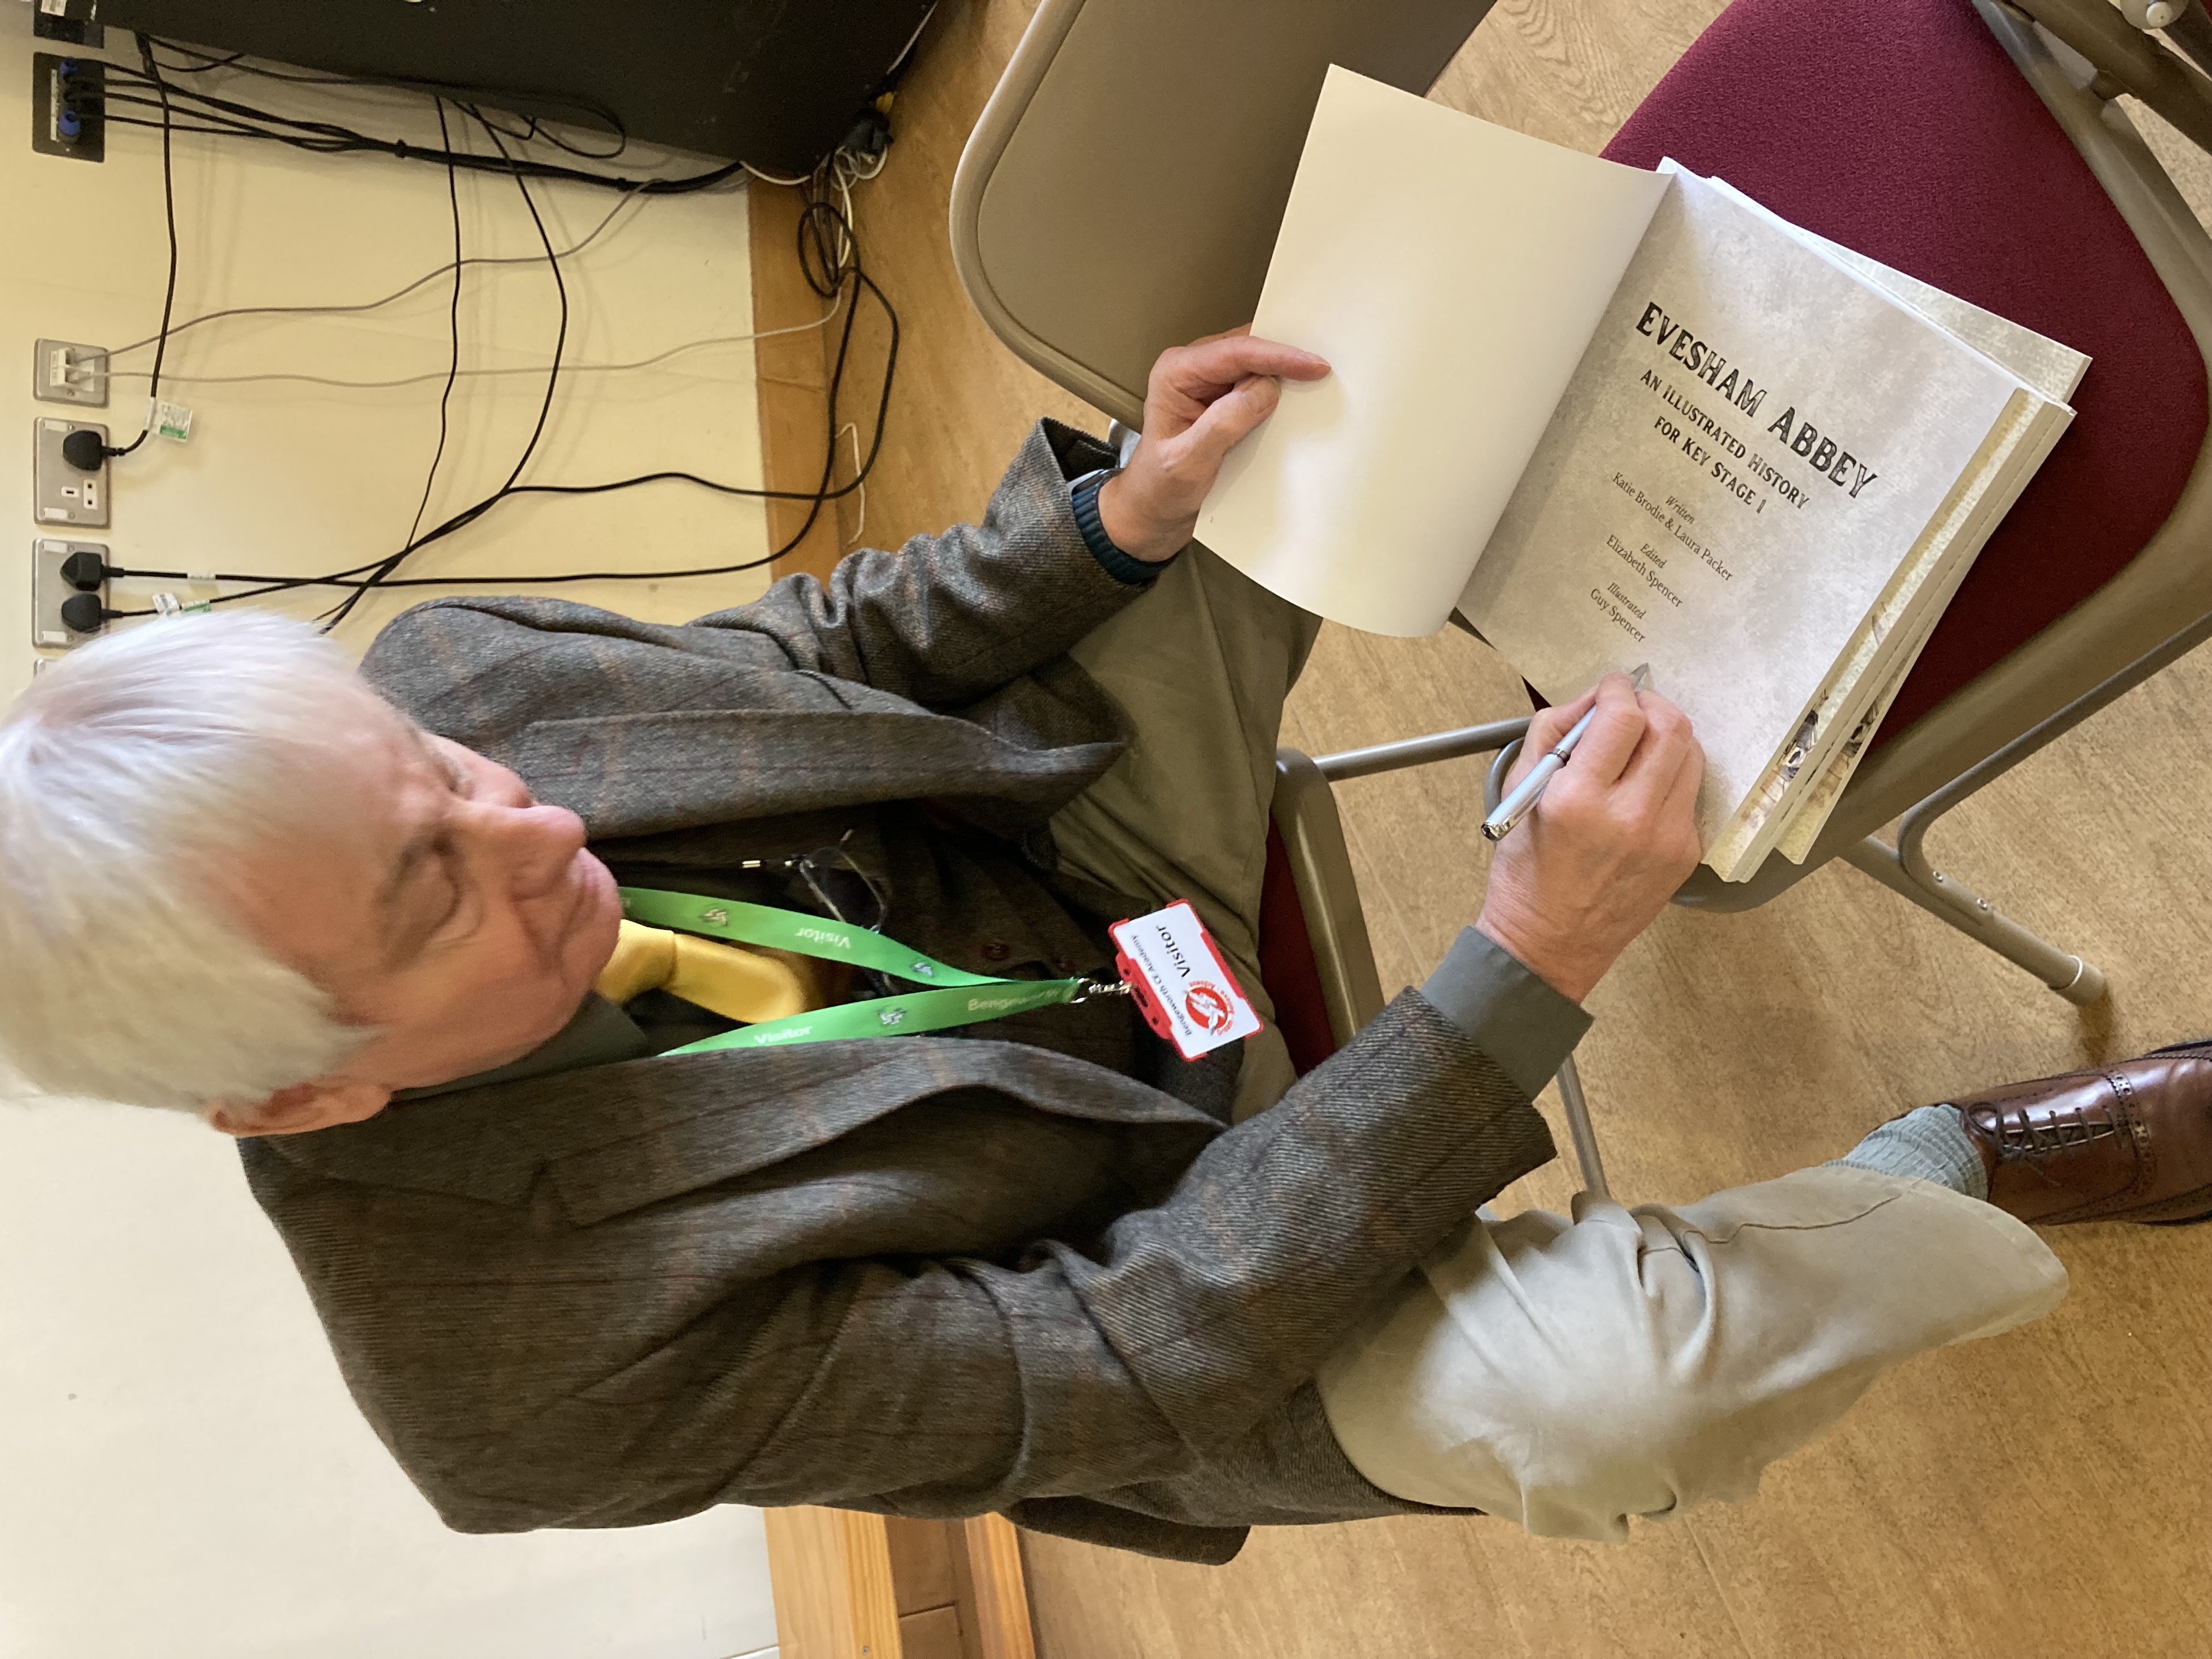 Lawrence Stribling signing his book on Evesham Abbey